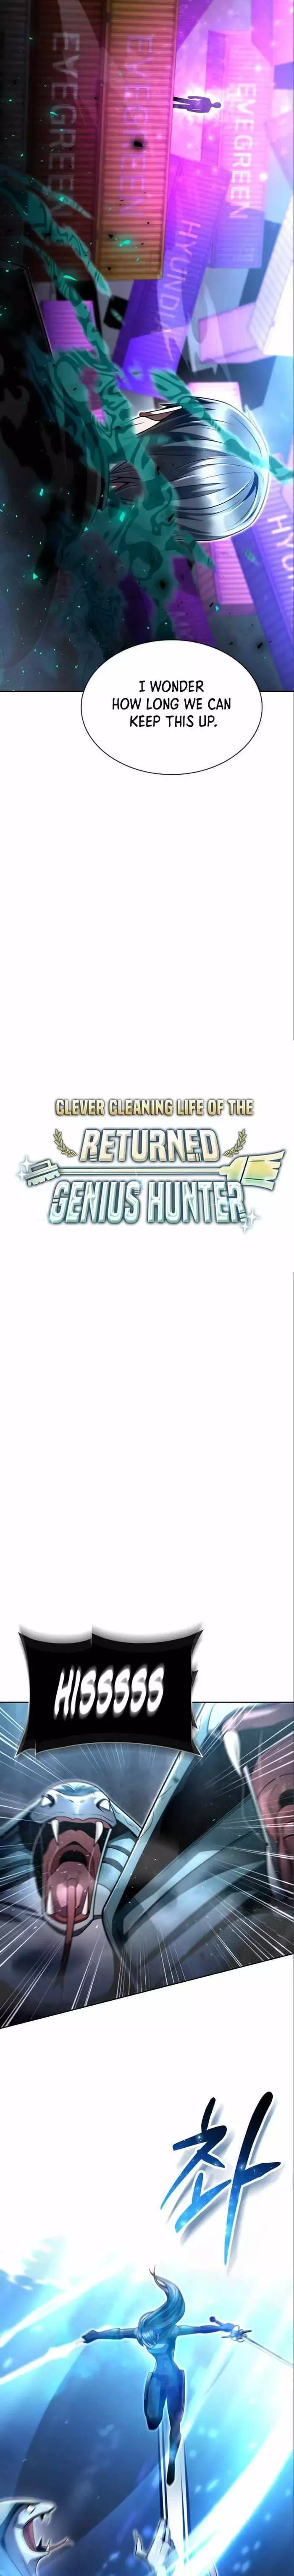 Clever Cleaning Life Of The Returned Genius Hunter - 54 page 6-cce13ee9